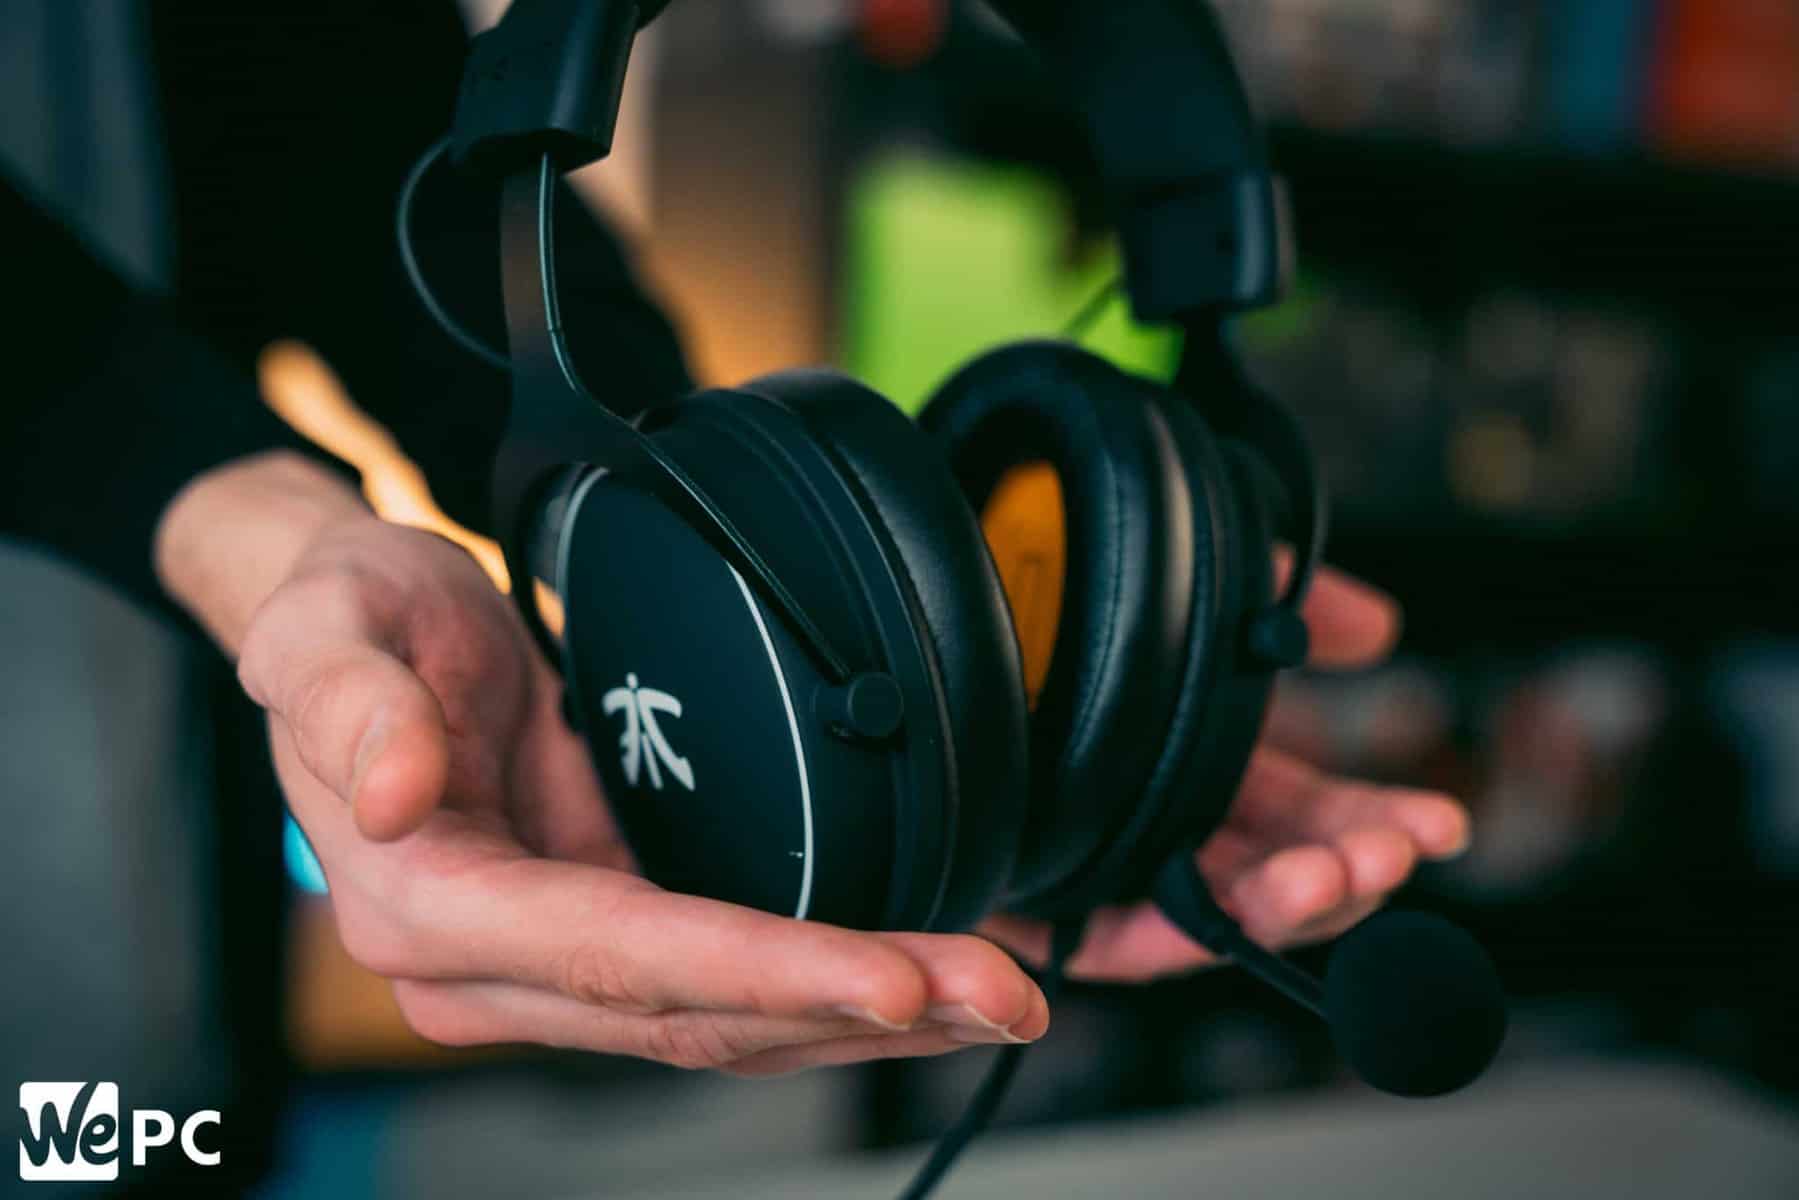 Fnatic React Review! NO BS Gaming Headset 